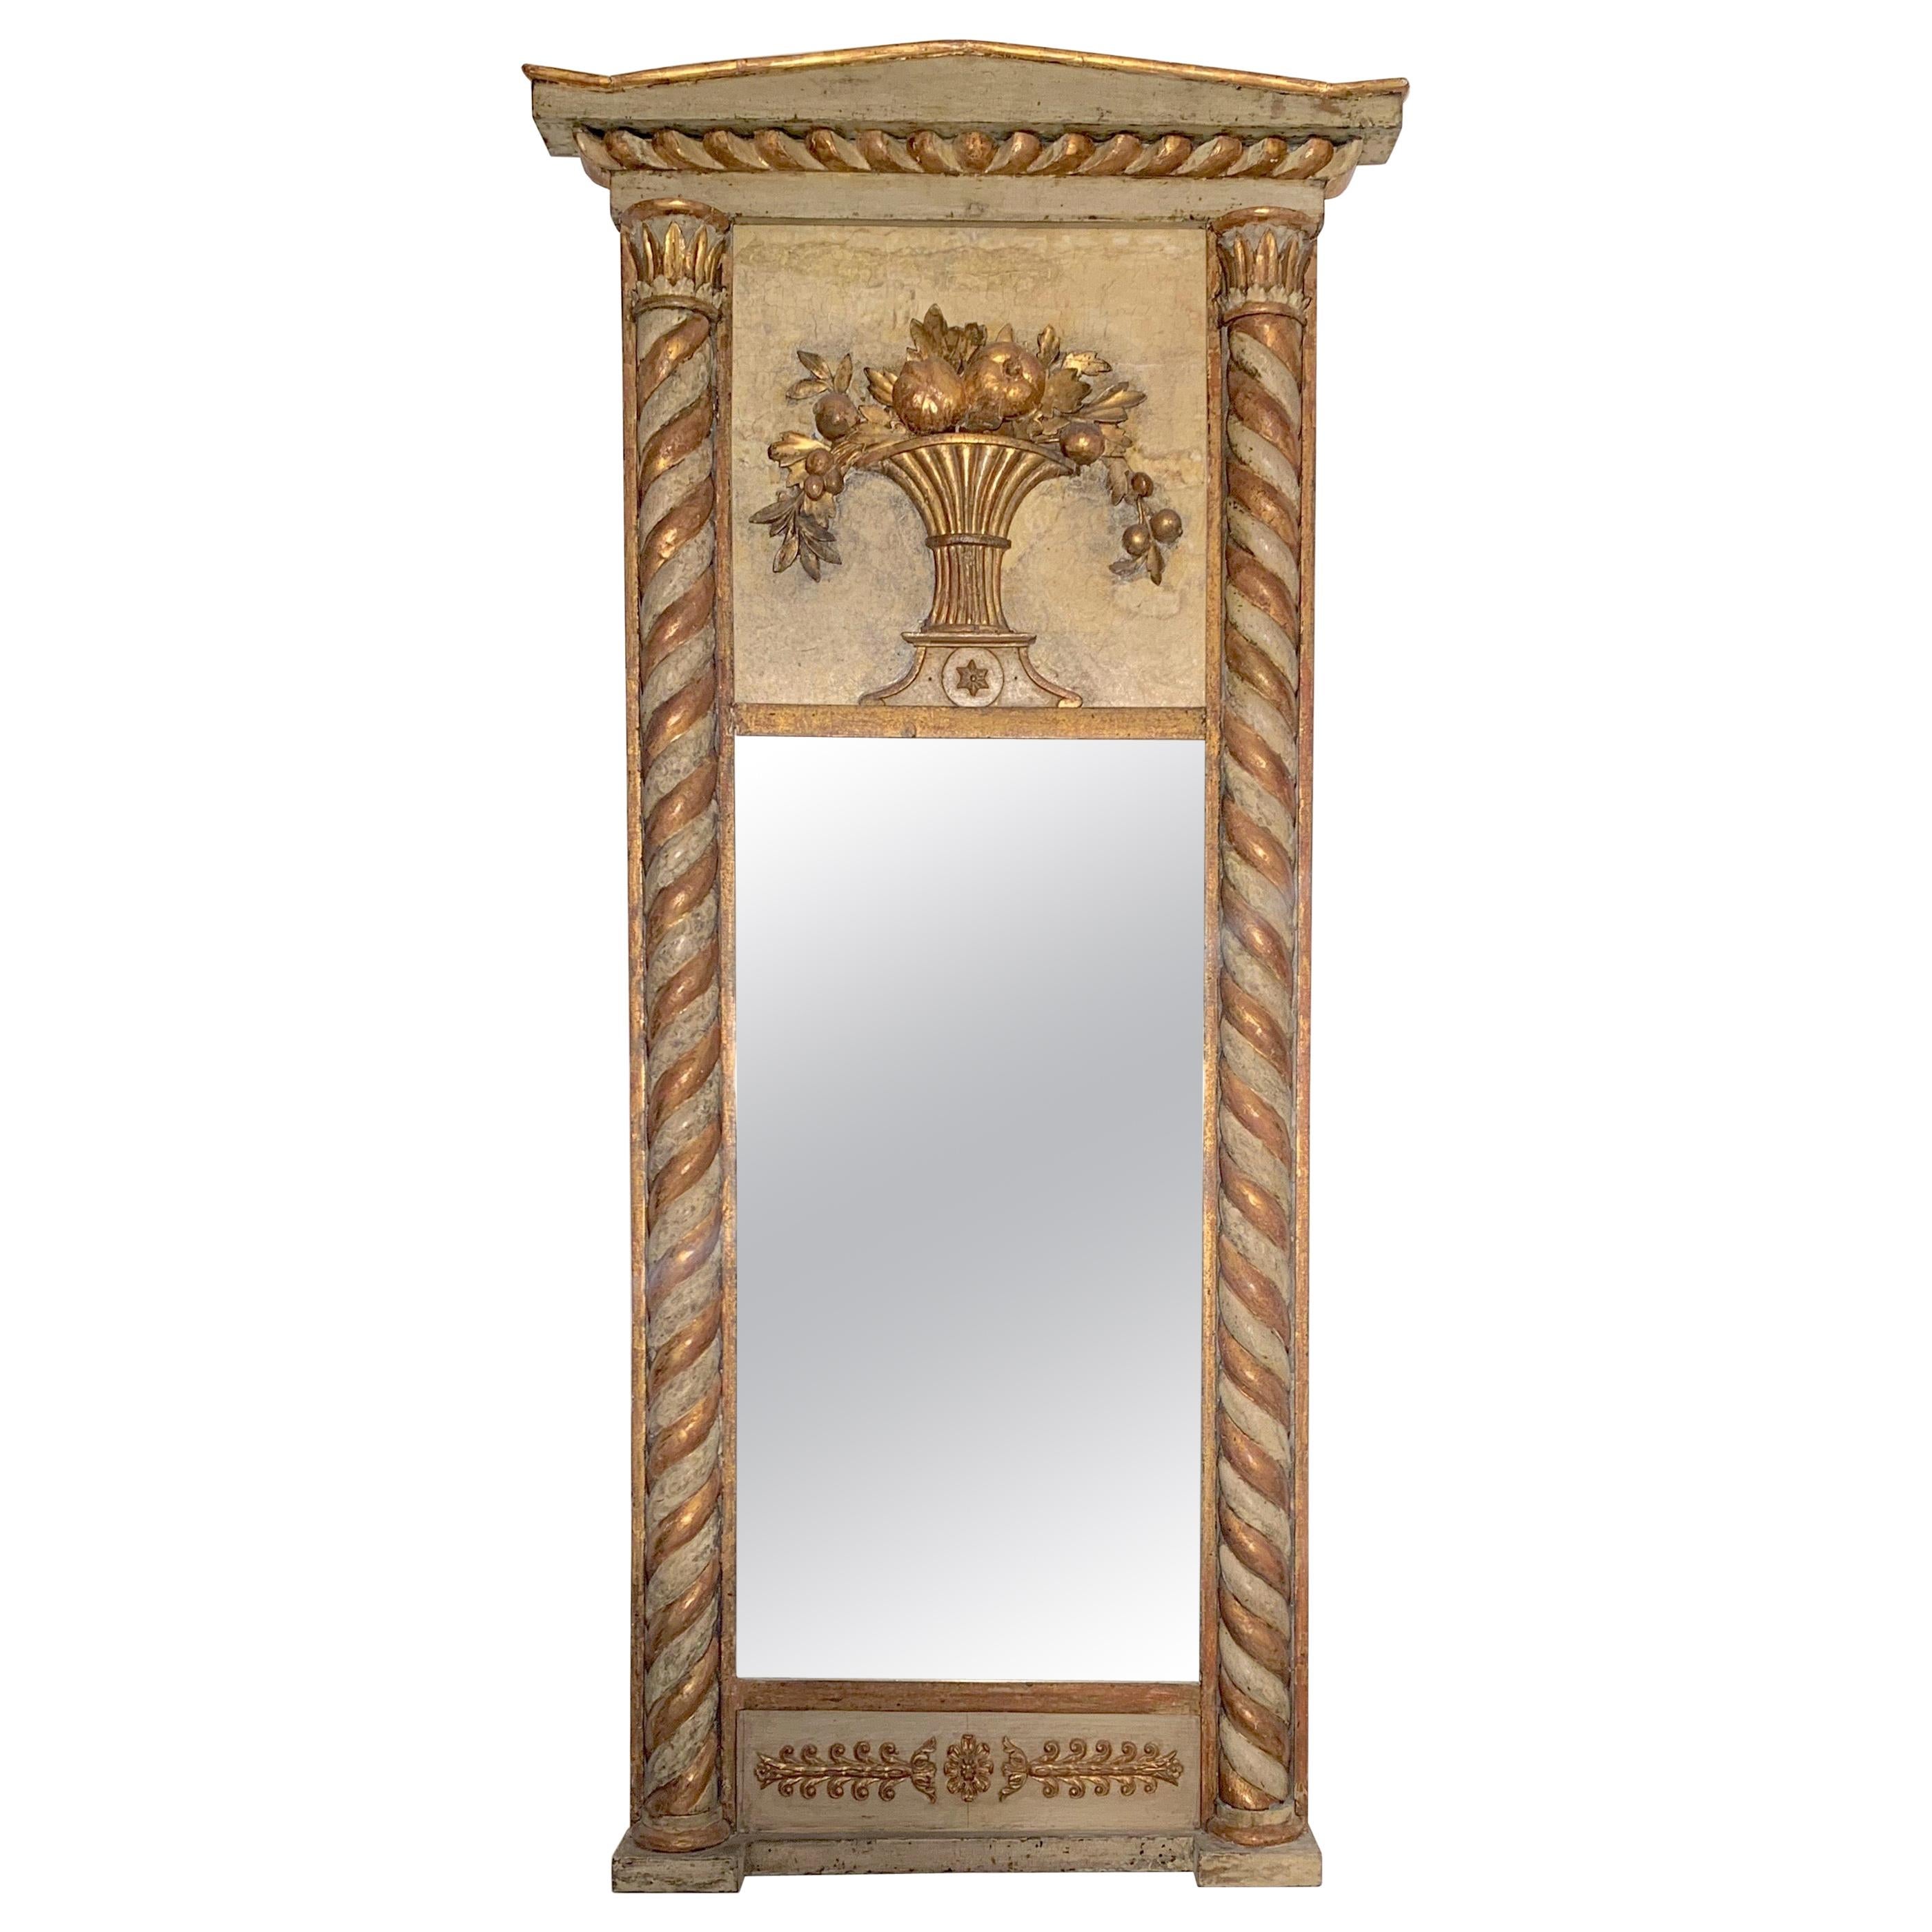 Antique Empire Gilt Carved Painted Beech Wood Swedish Trumeau Wall Mirror For Sale